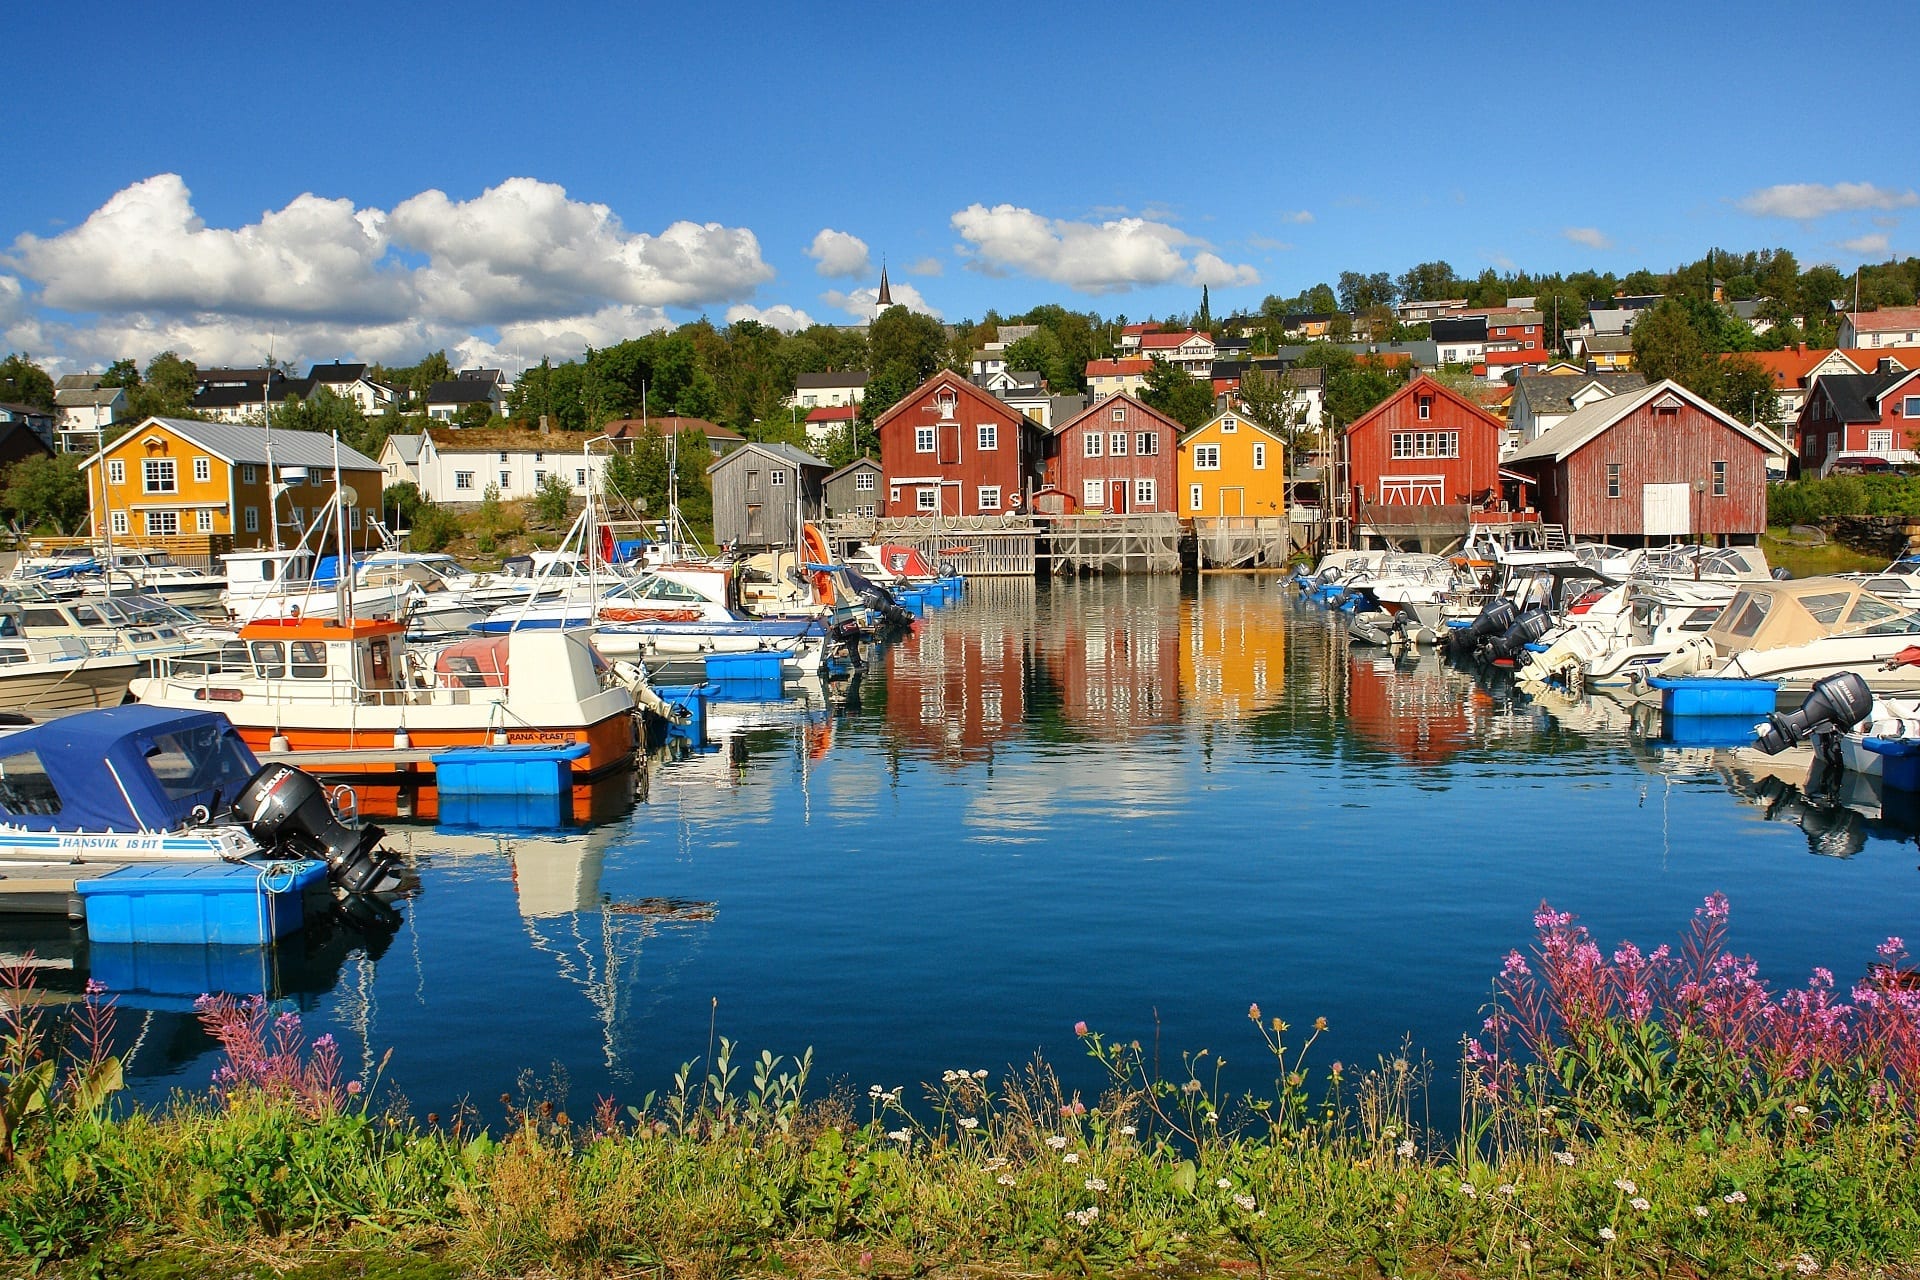 Beautiful and colorful photo of boat houses next to the marina at Hemnesberget with boats and flowers in the foreground.